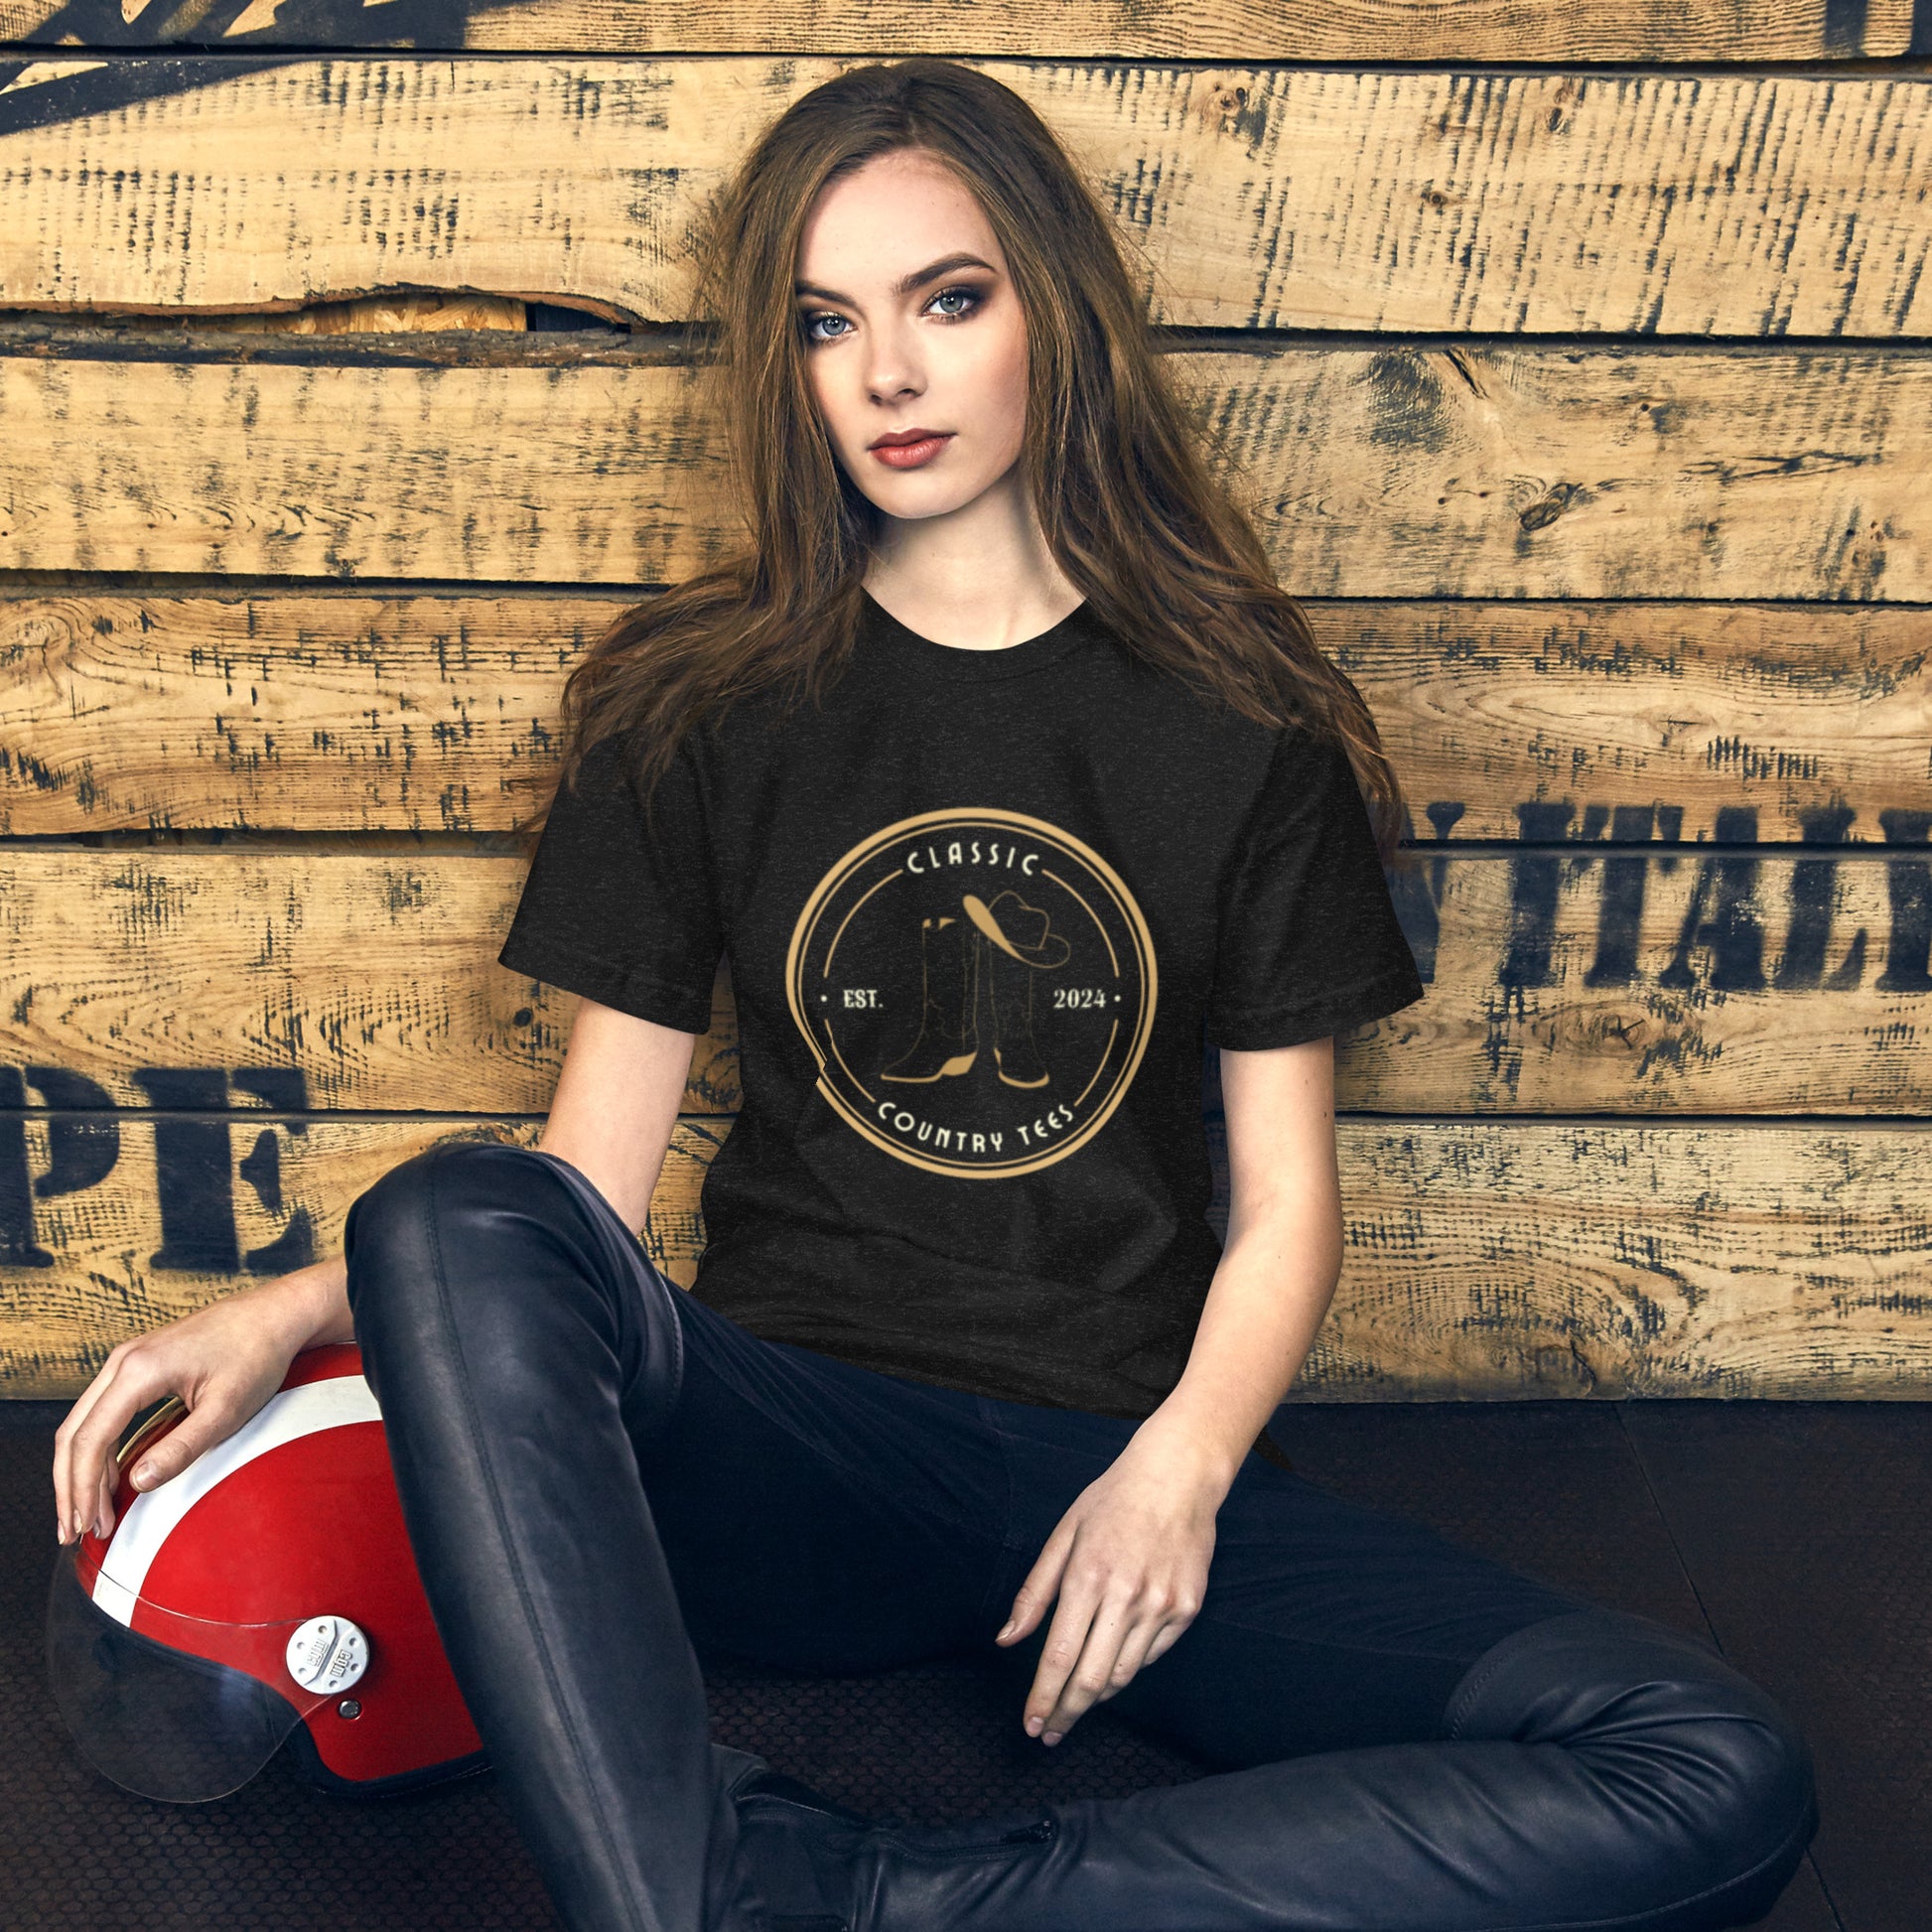 Classic Country Tees - Get Your Twang On with Classic Country Tees - The Ultimate Unisex T-Shirt for True Country Souls! - Classic Country Tees